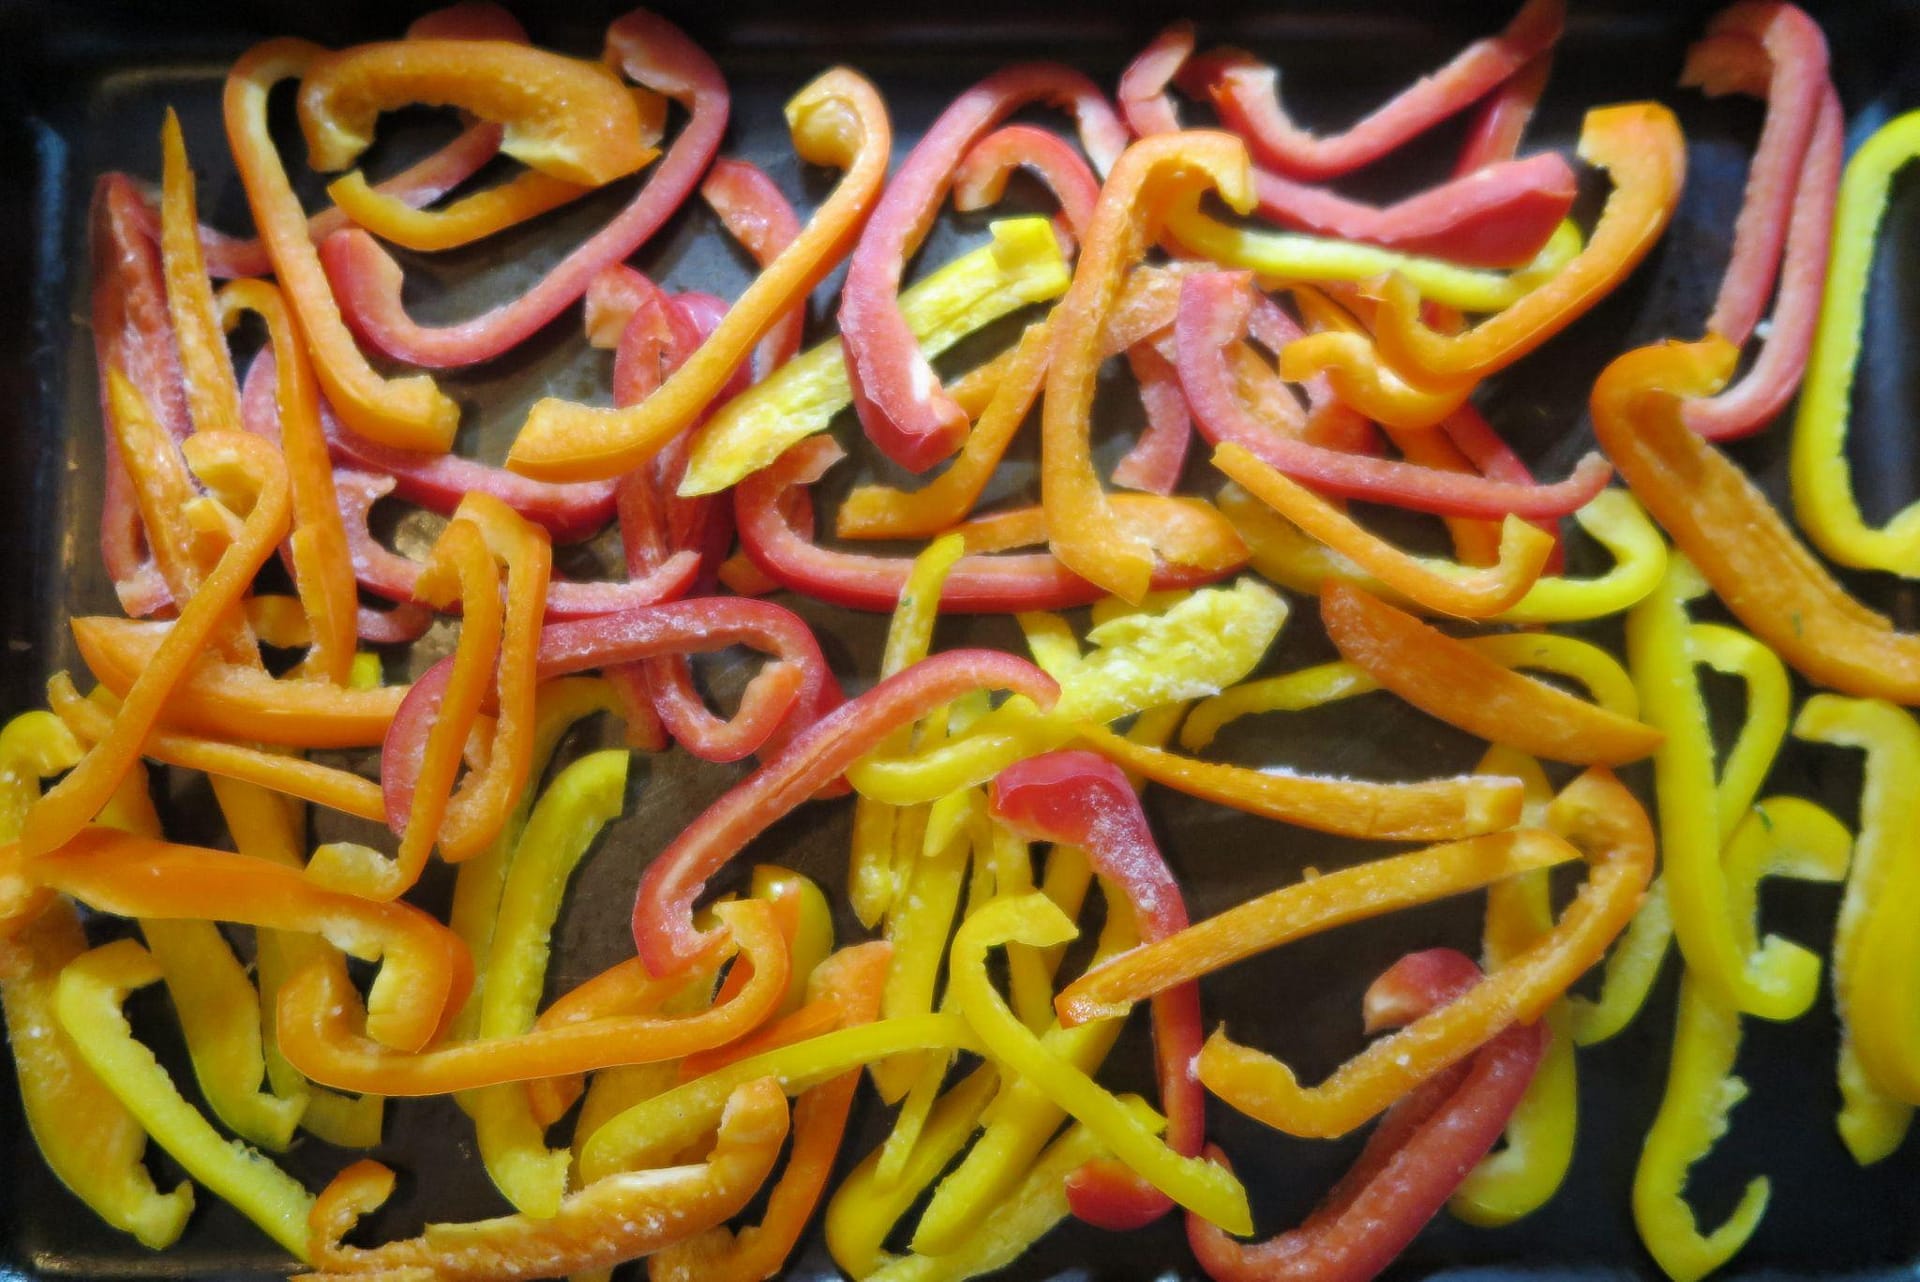 A dark cookie sheet of slices of orange, yellow, and red bell peppers